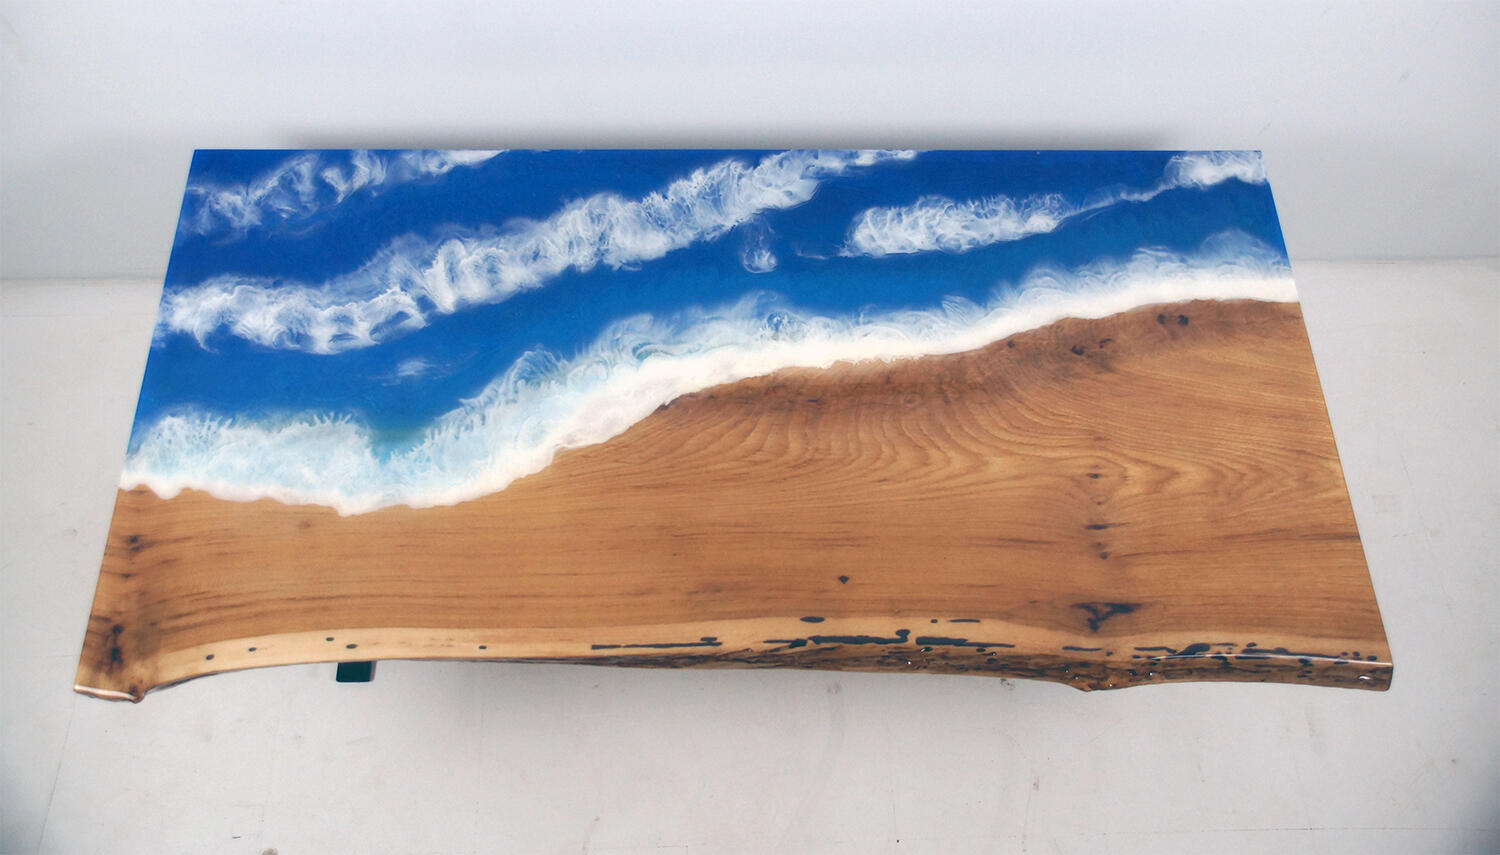 Custom Made Epoxy Resin Ocean Tables For Sale Locally Near You (U.S. Only) And Online By CVCF